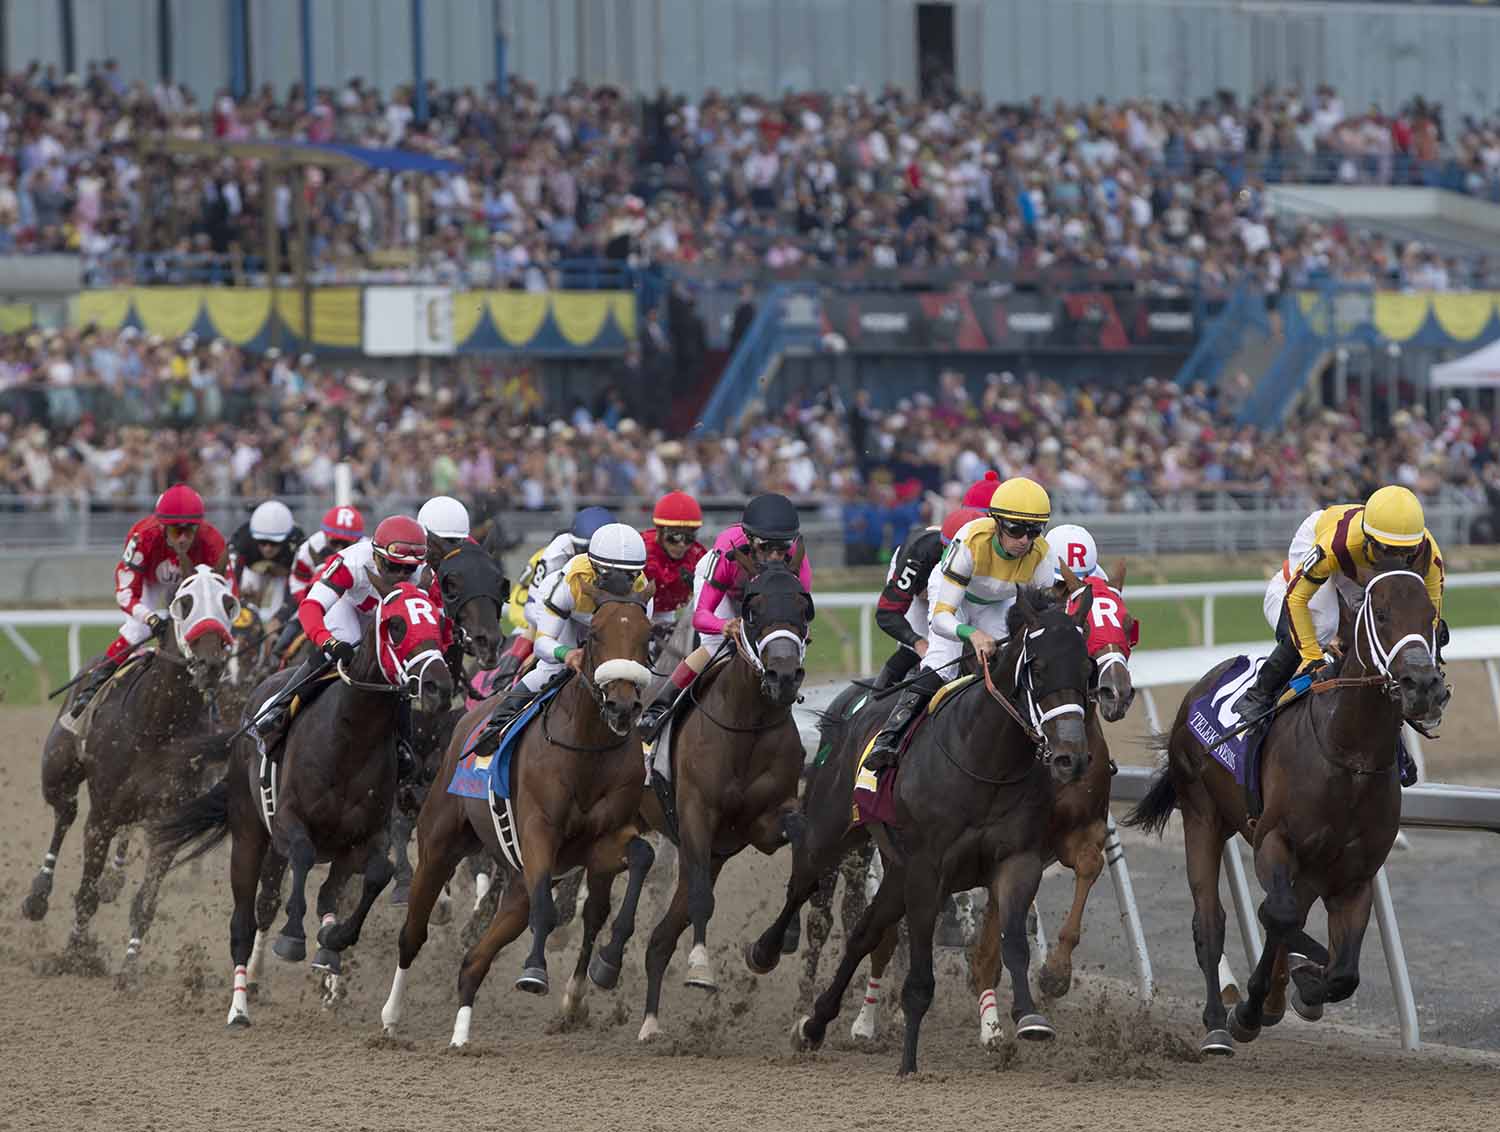 Thoroughbred horses competing for Queen's Plate at Woodbine Racetrack.